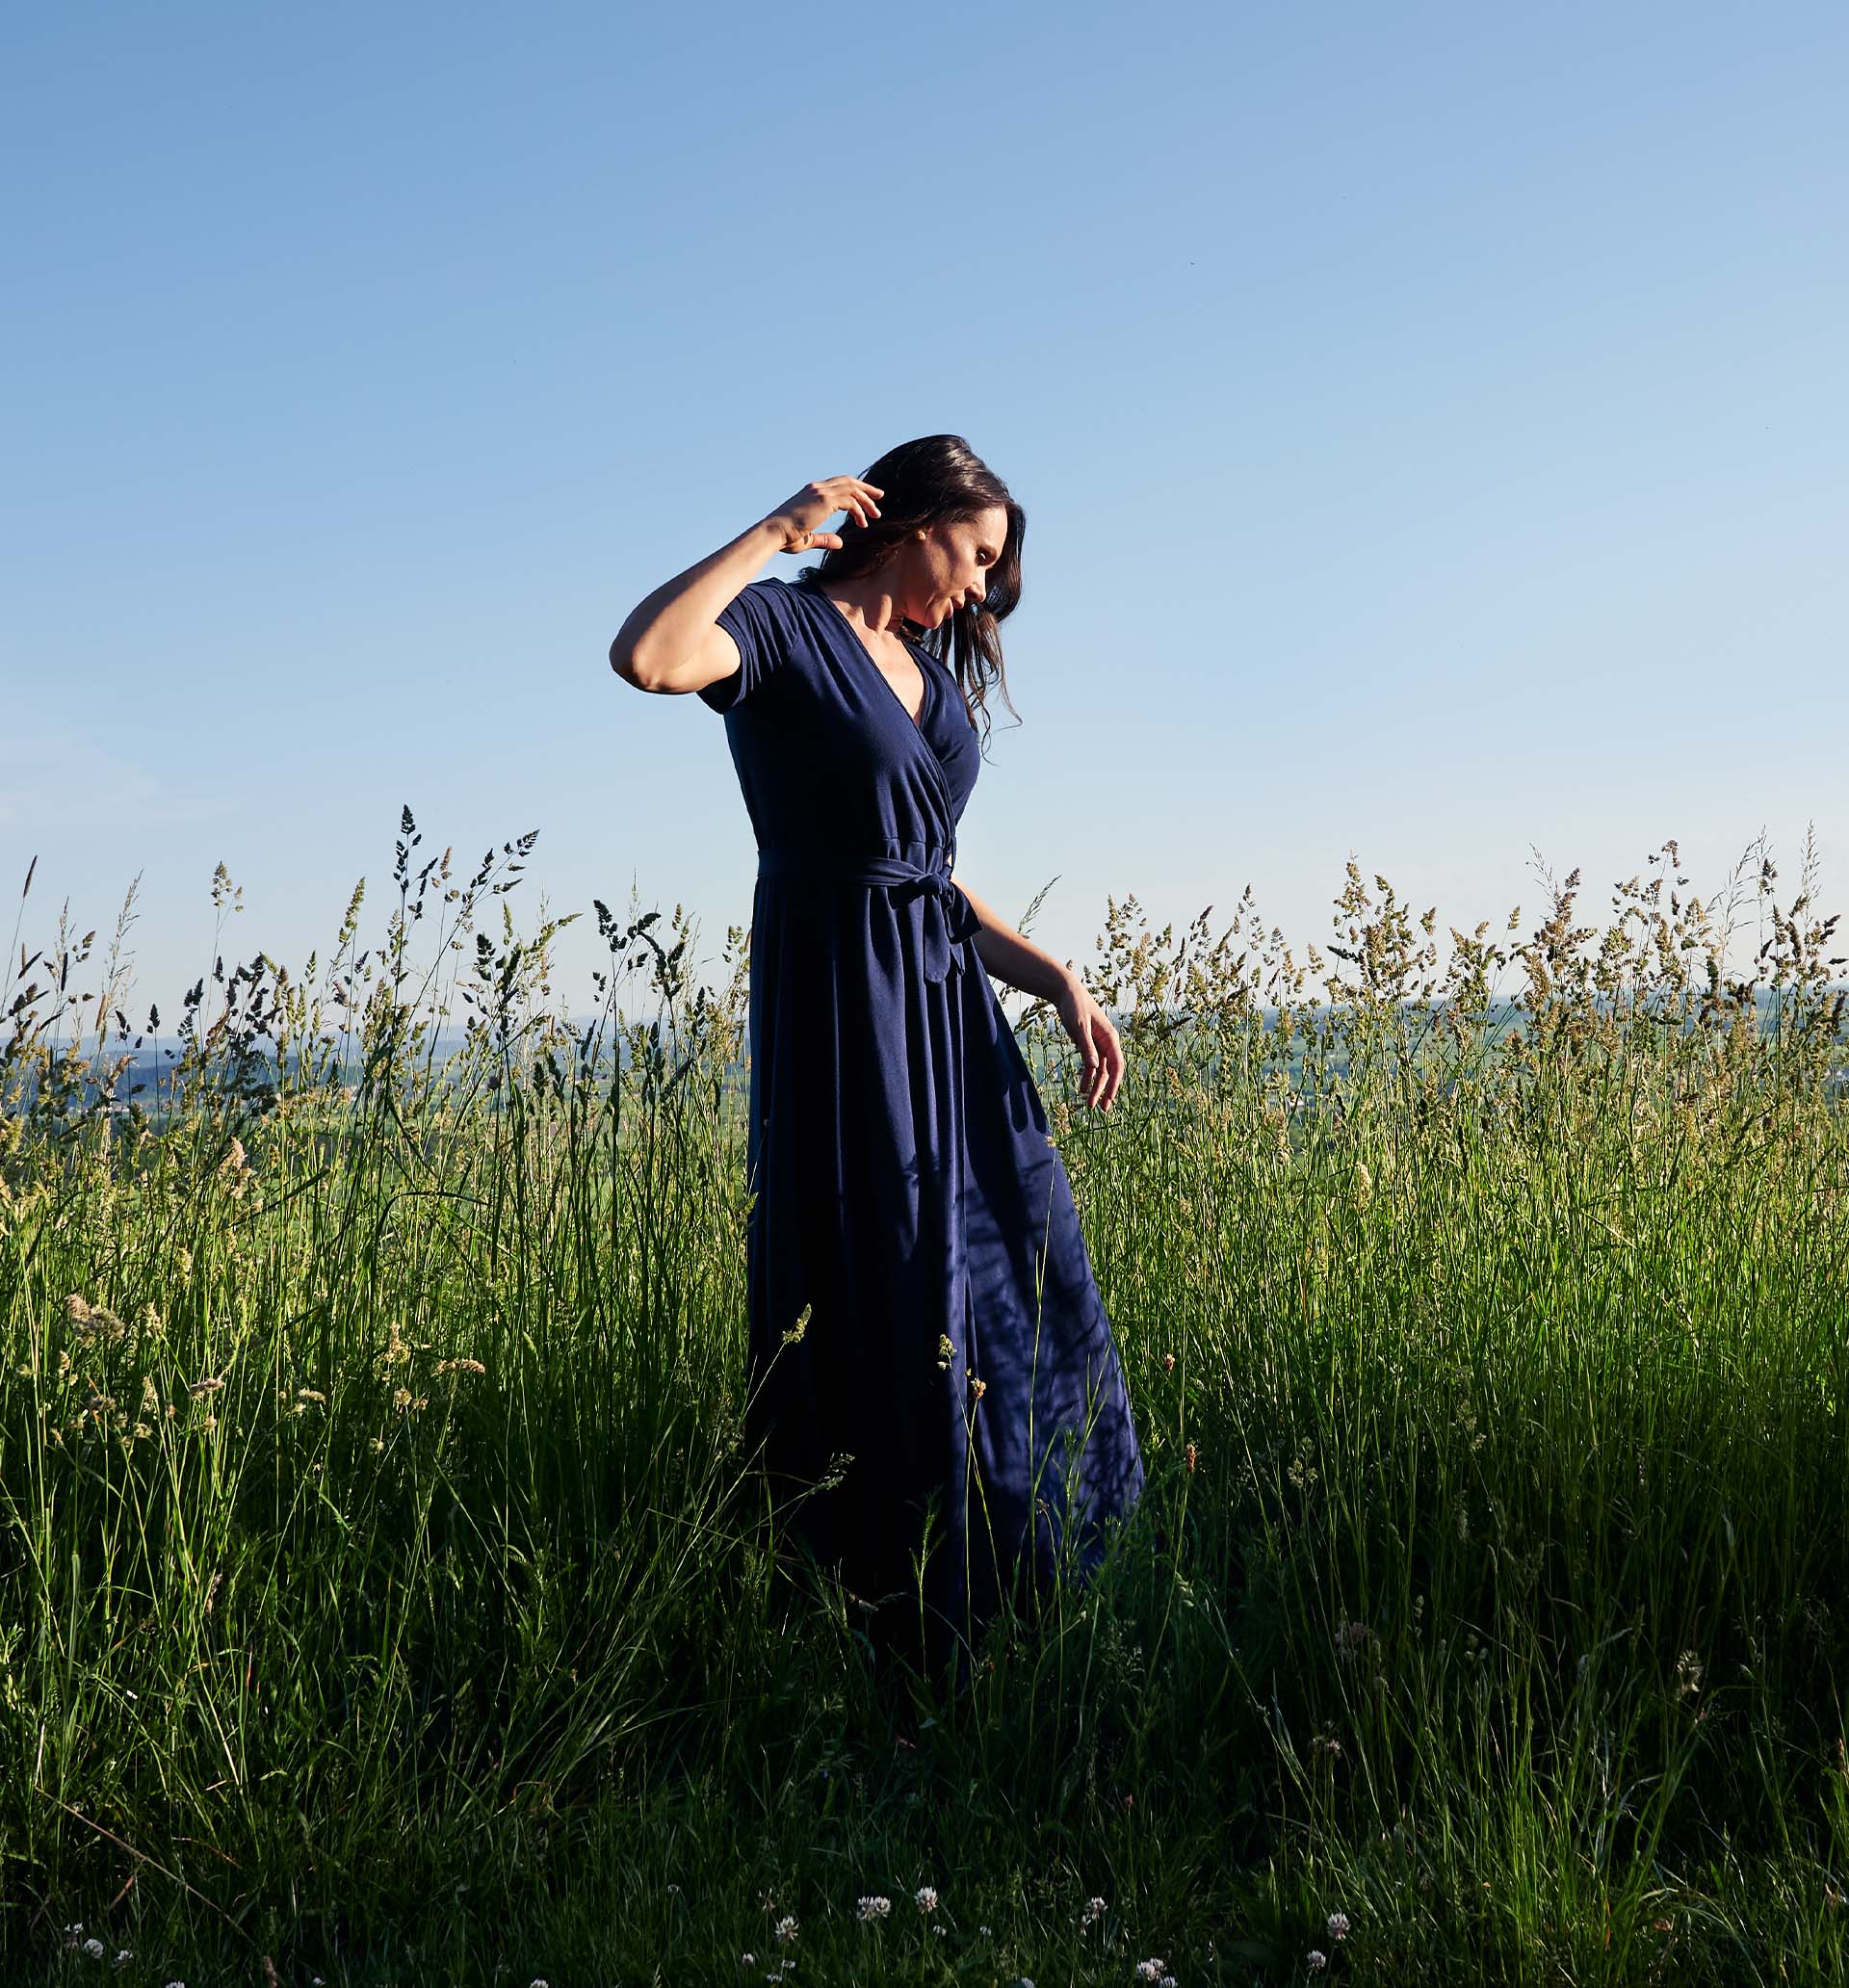 Woman in blue dress standing in tall grass